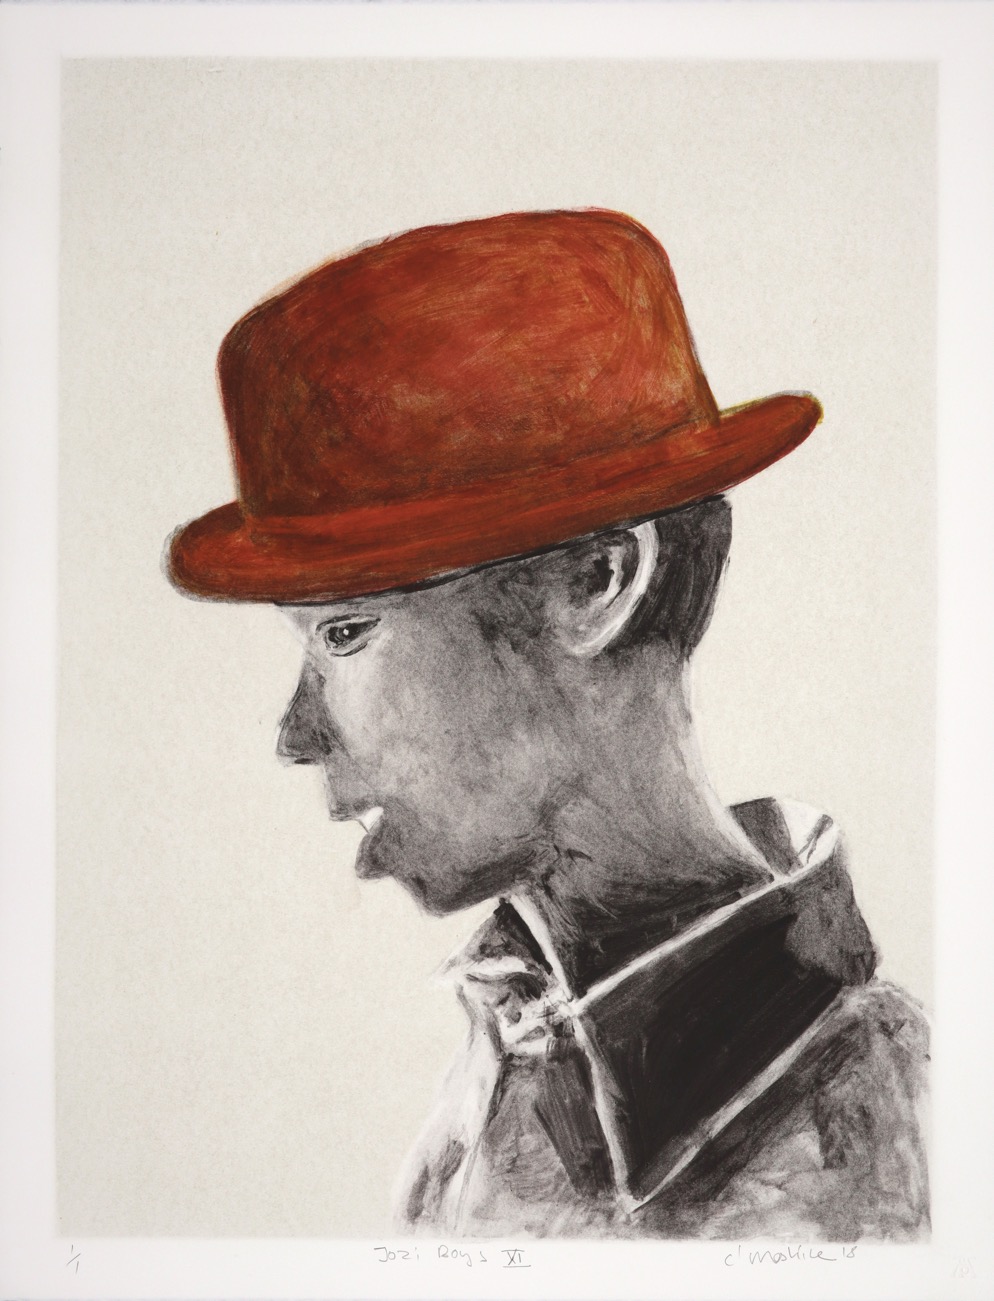 Monochrome profile of a young man with a reddish-brown hat on.